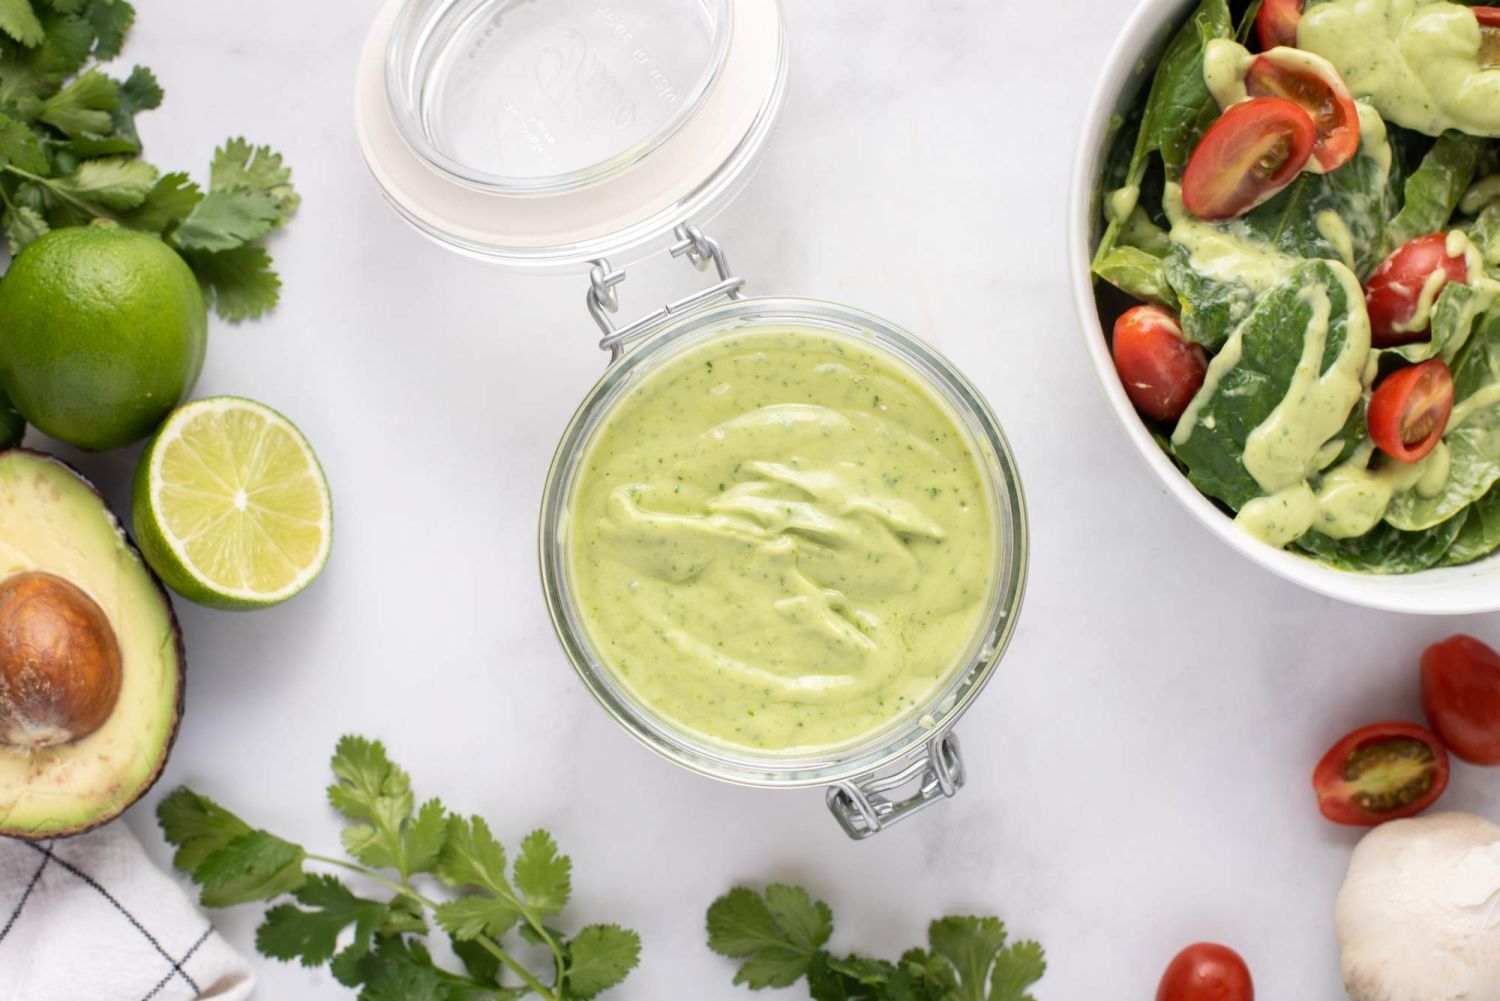 Avocado salad dressing with cilantro, lime juice, and yogurt in a glass jar with fresh vegetables on the side.